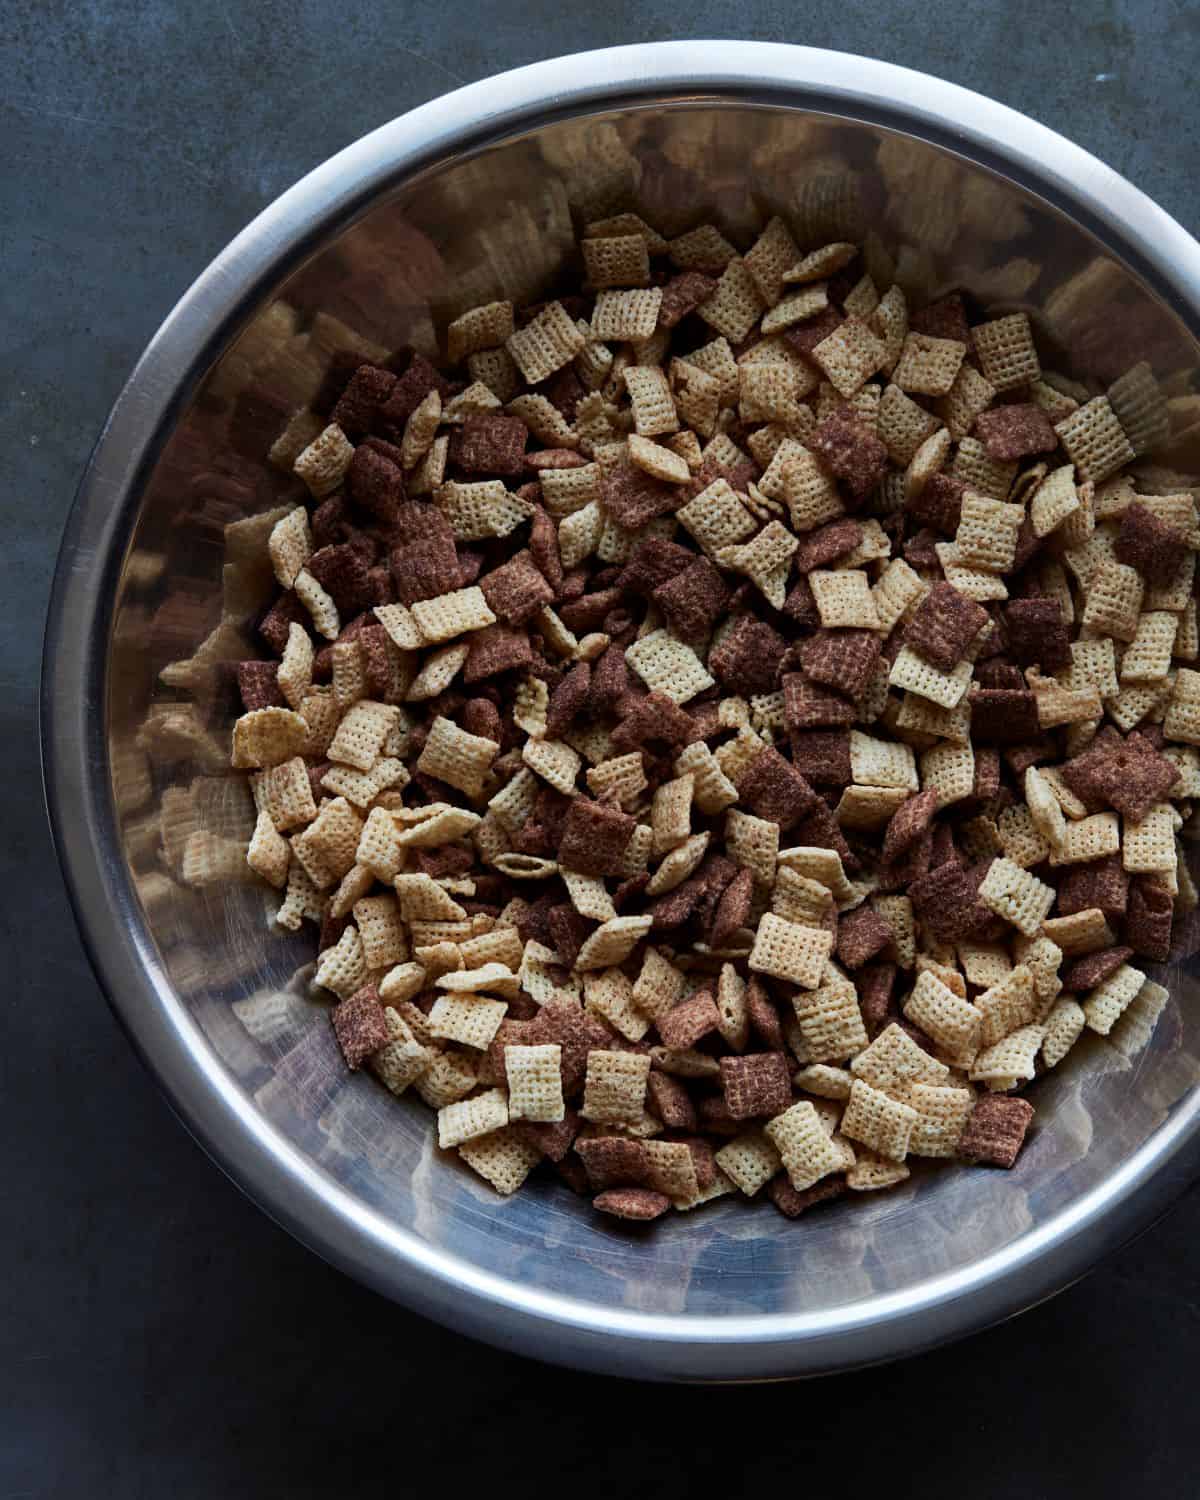 A big steel mixing bowl filled with plain and chocolate Chex.